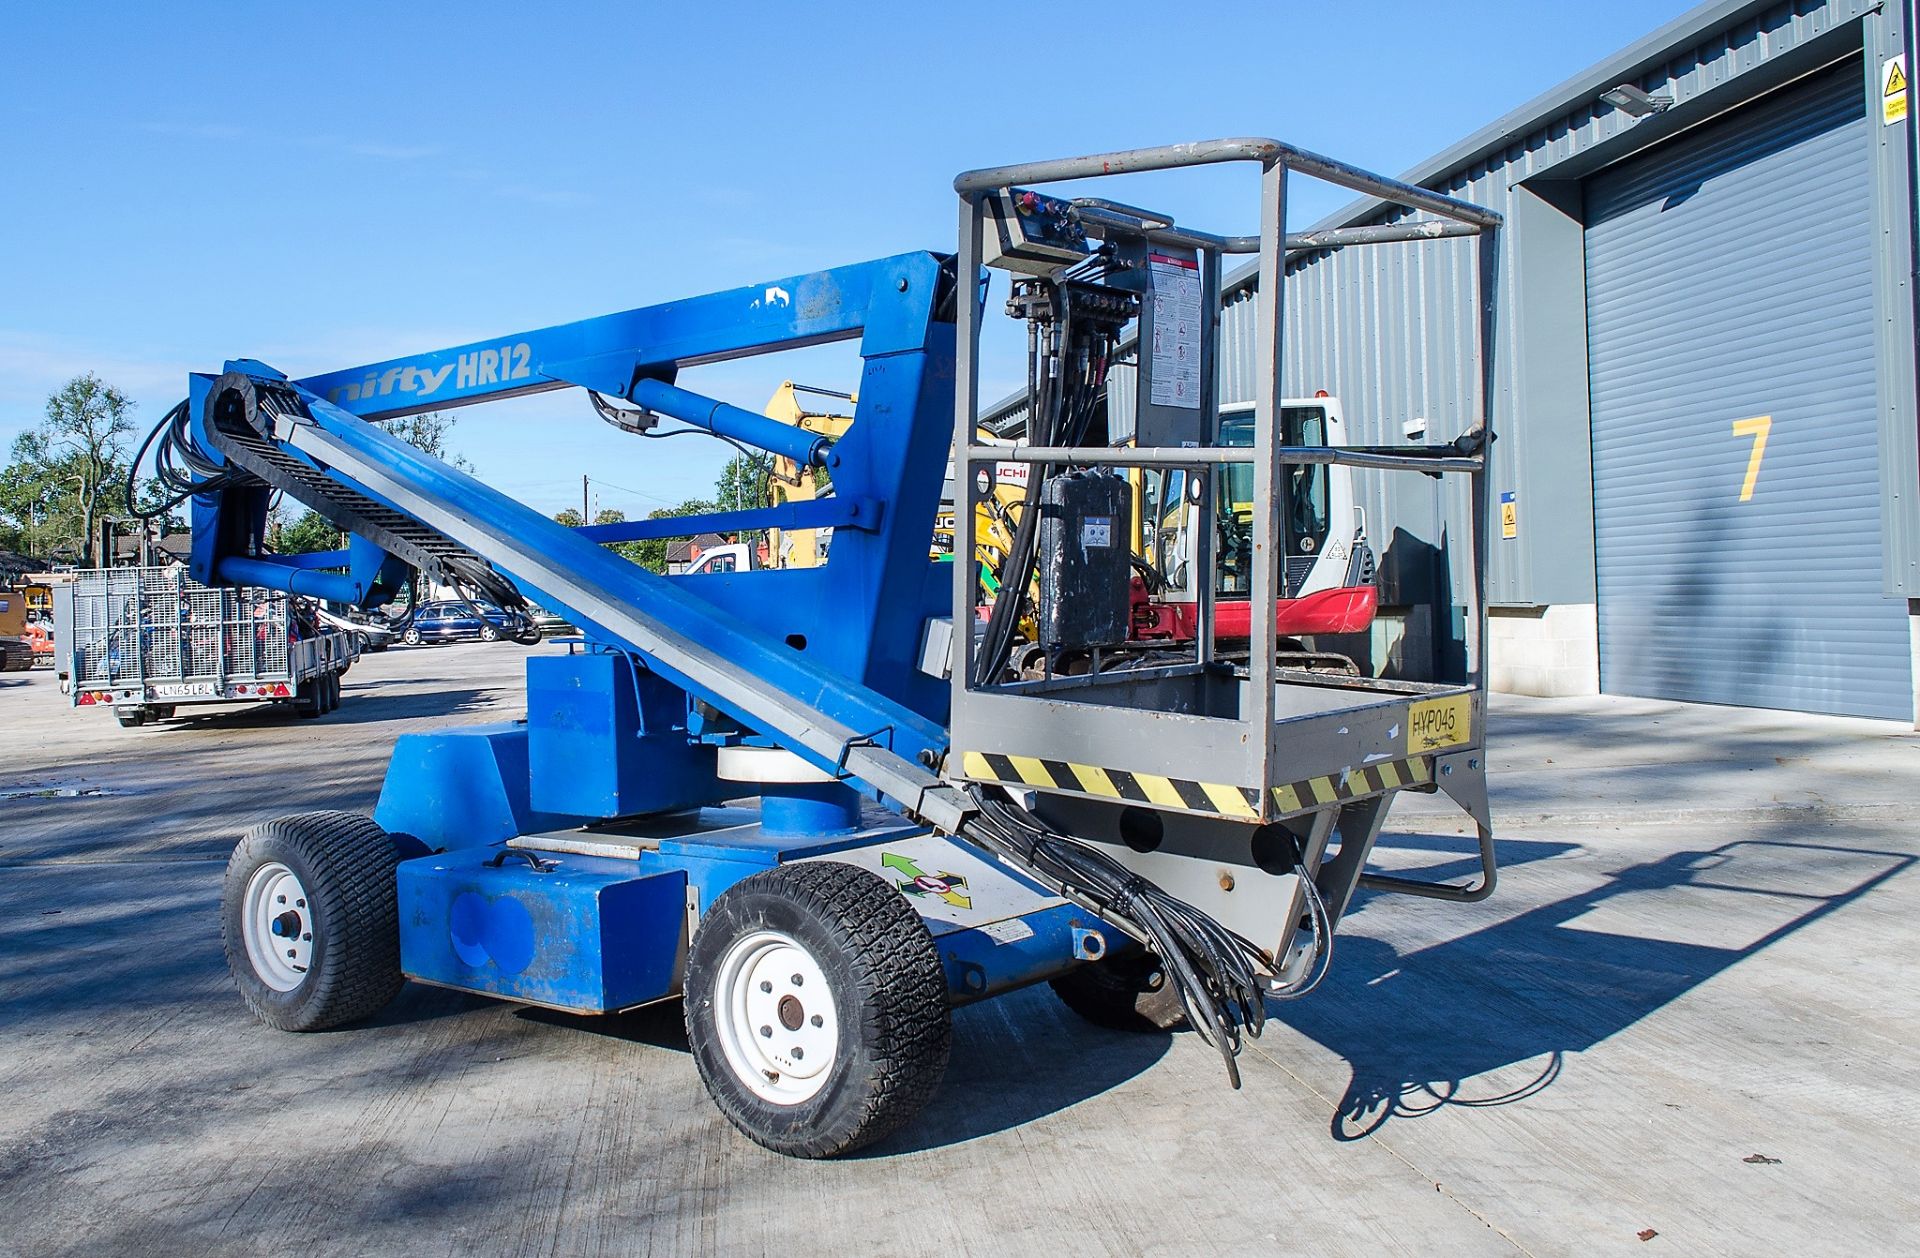 Nifty HR12 NDE diesel driven/battery electric articulated boom lift  Year: 2006  S/N: 12-13635 - Image 2 of 17